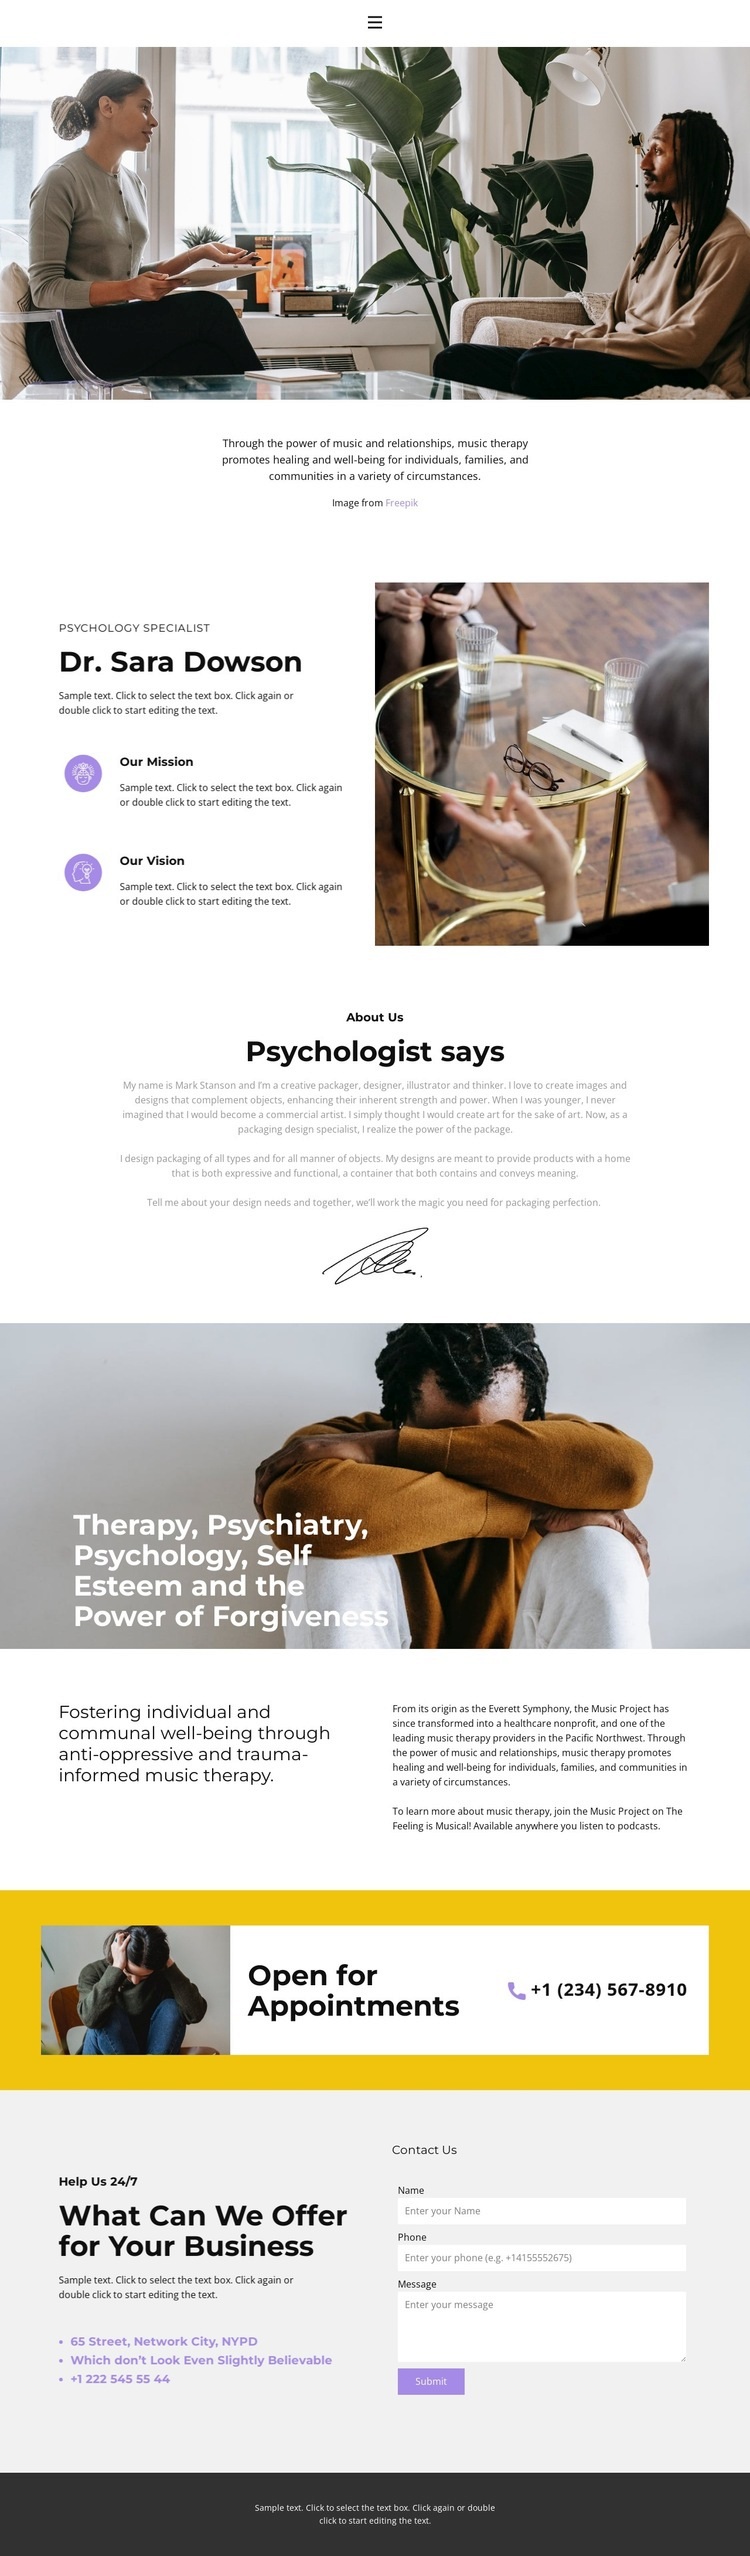 Qualified help from a psychologist Webflow Template Alternative